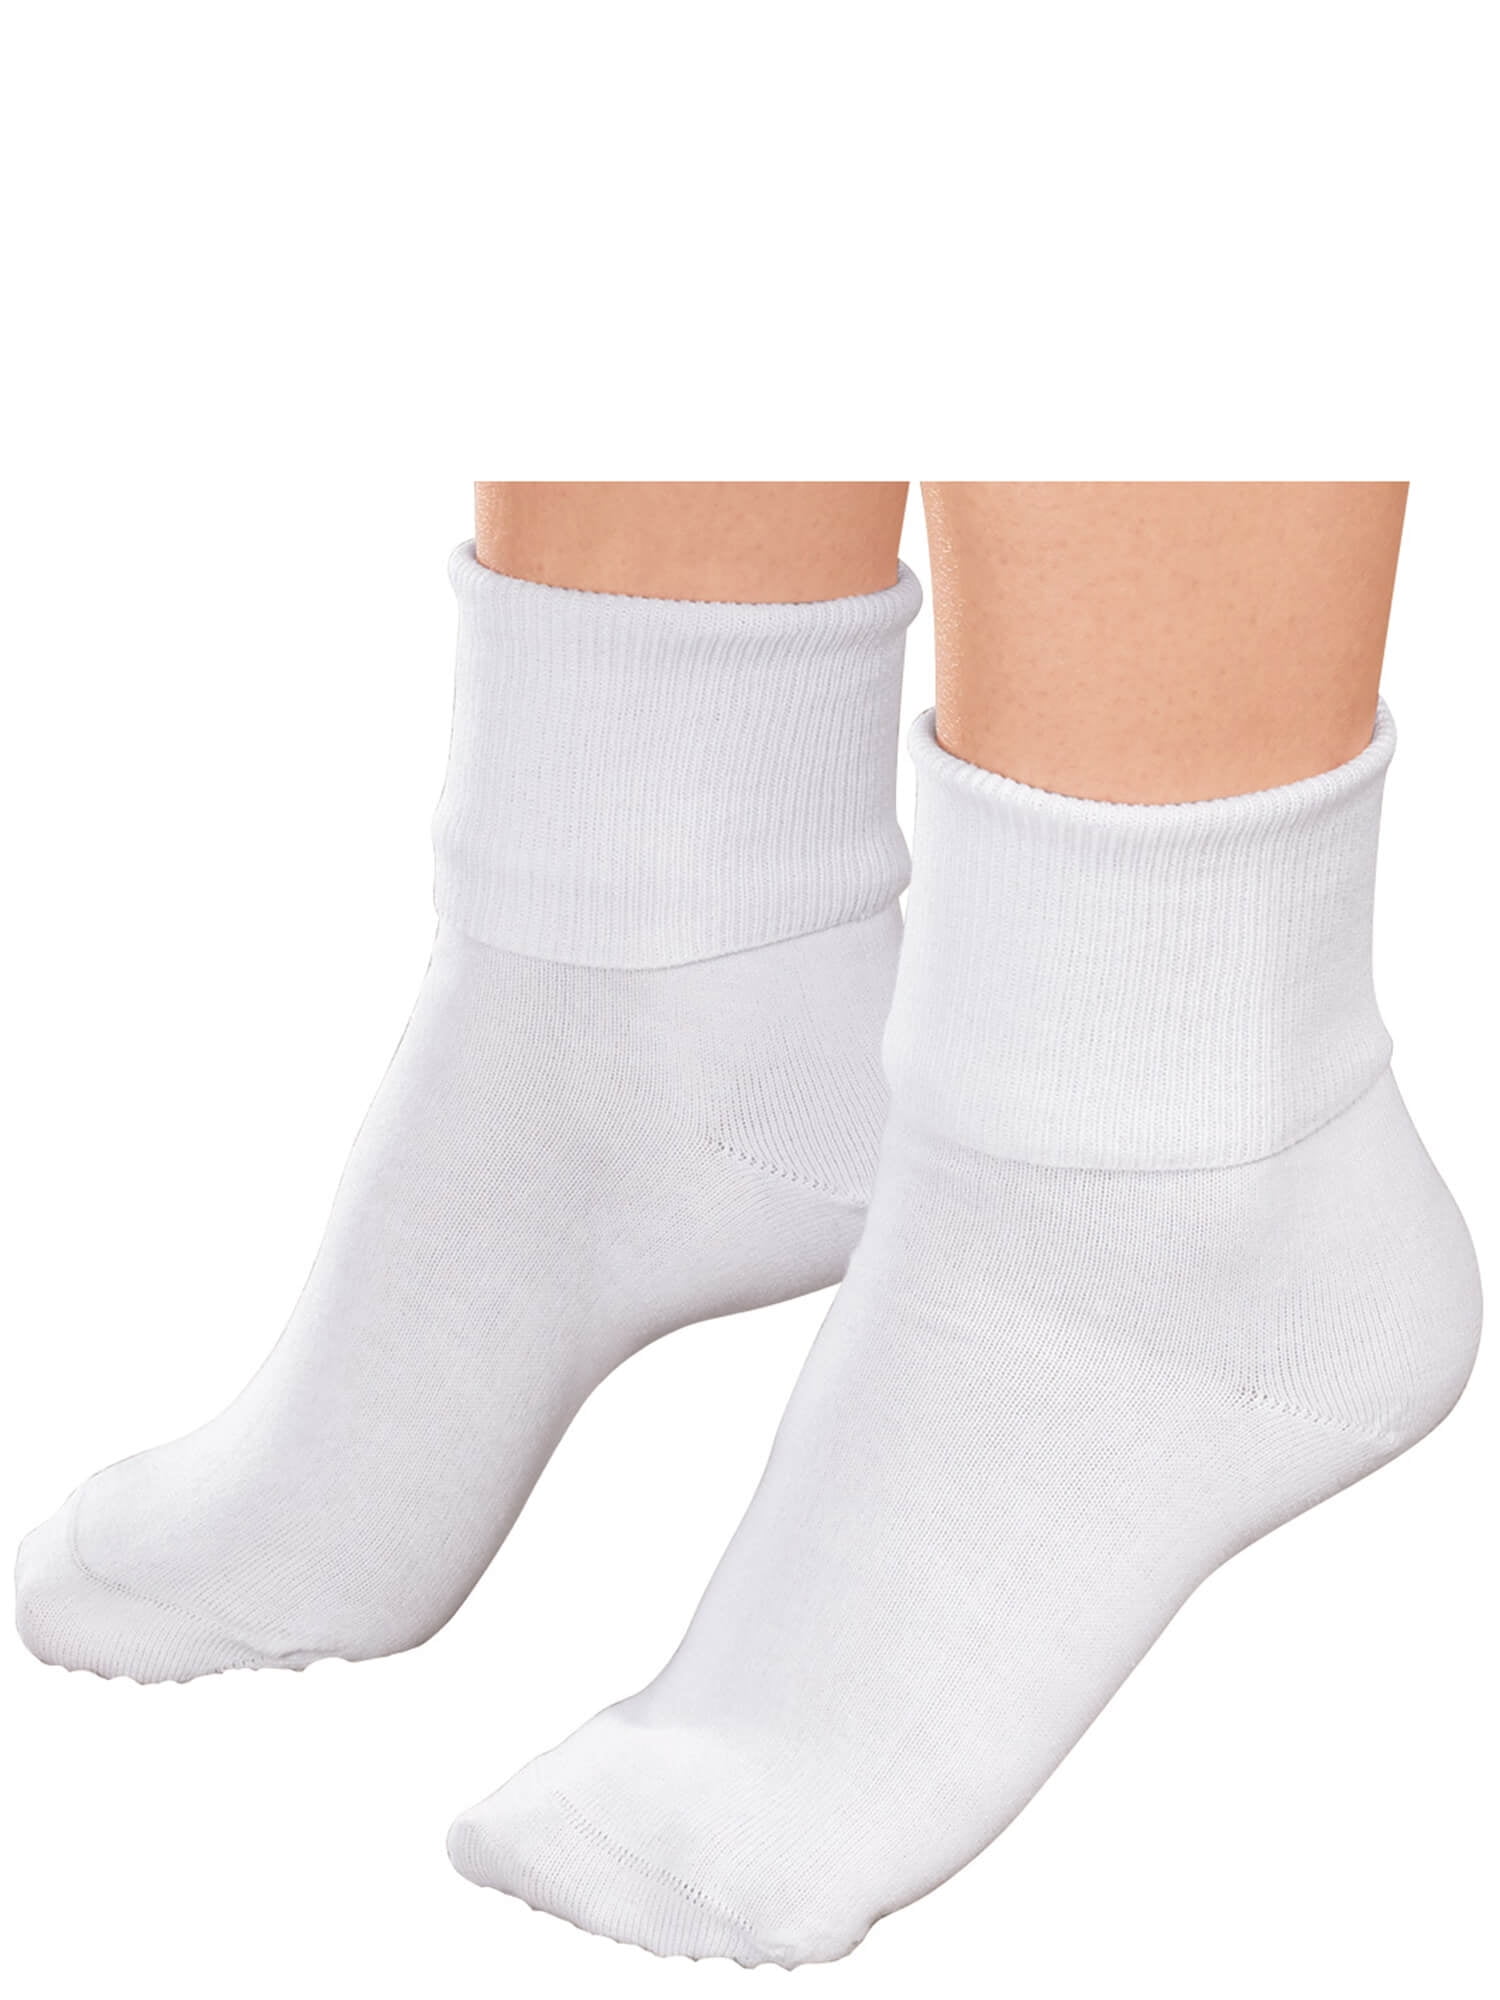 Women's Buster Brown 100% Cotton Socks Pack of 3 Pairs 